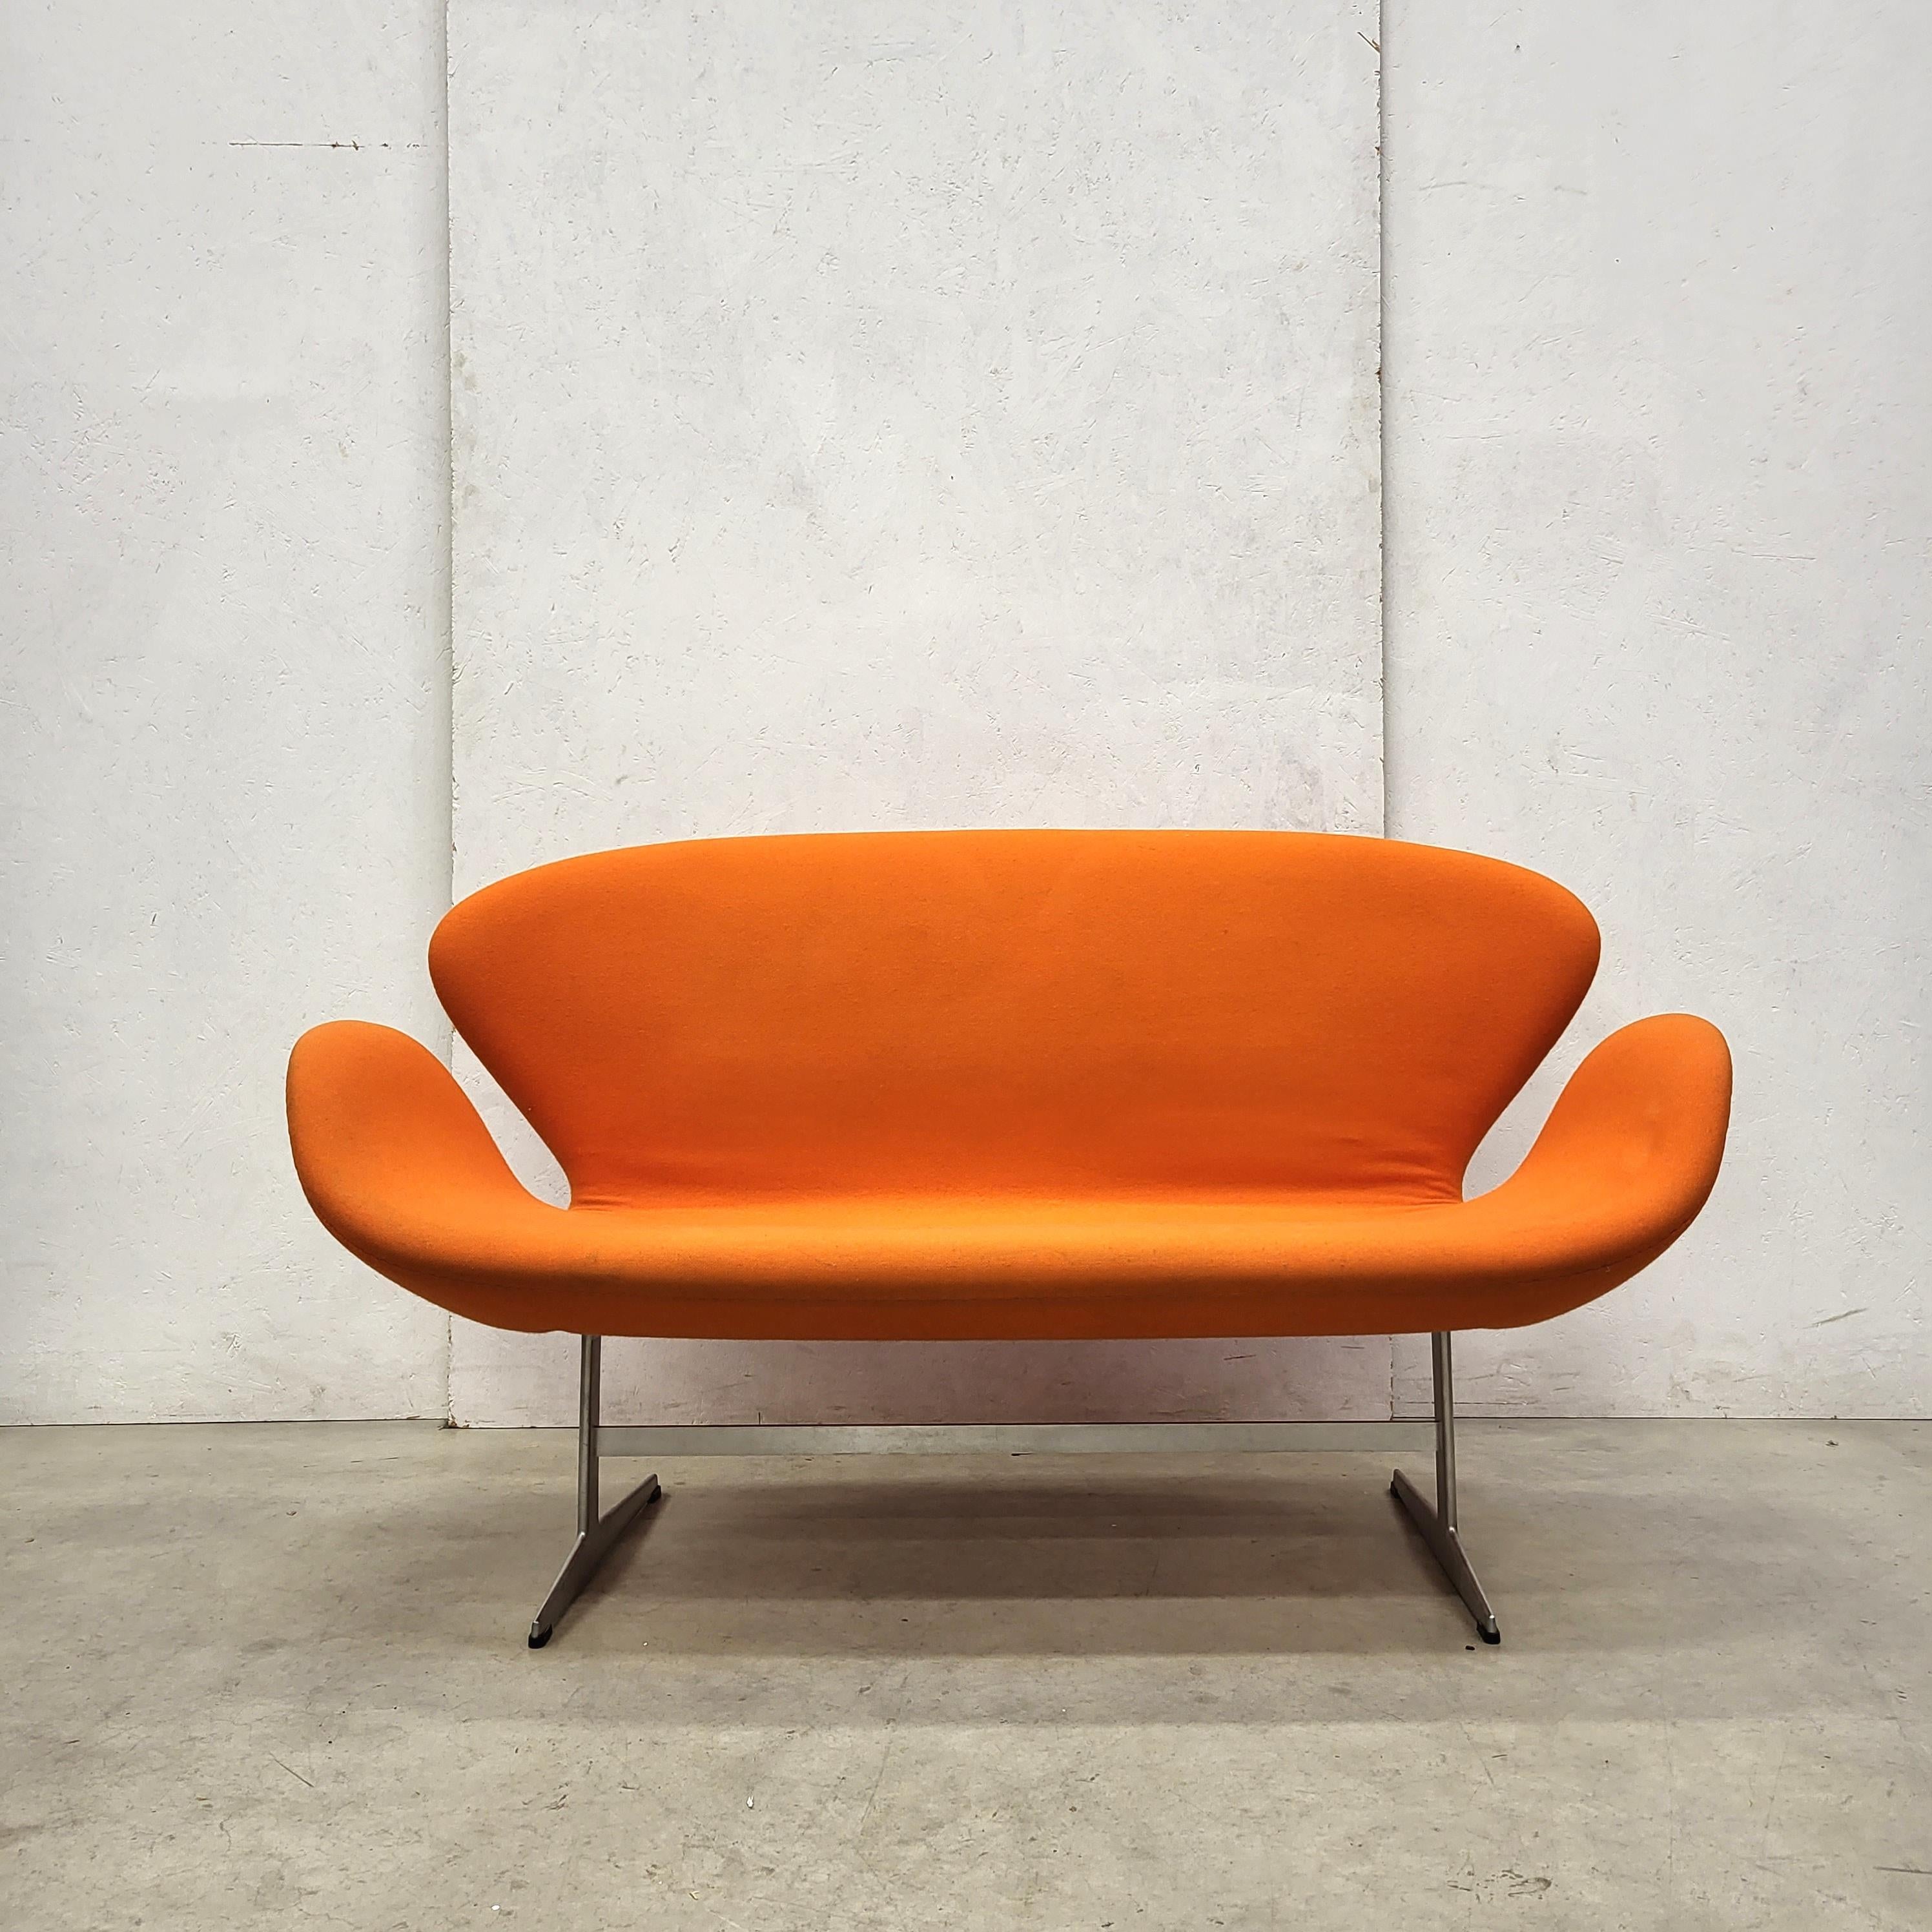 These wonderful living room set with a Swan Sofa and 2x Swan chairs were designed in the 1950s by Arne Jacobsen for the SAS Hotel in Copenhagen and produced by Fritz Hansen in 2006. 

The Swan set features a wonderful orange fabric upholstery. 
The